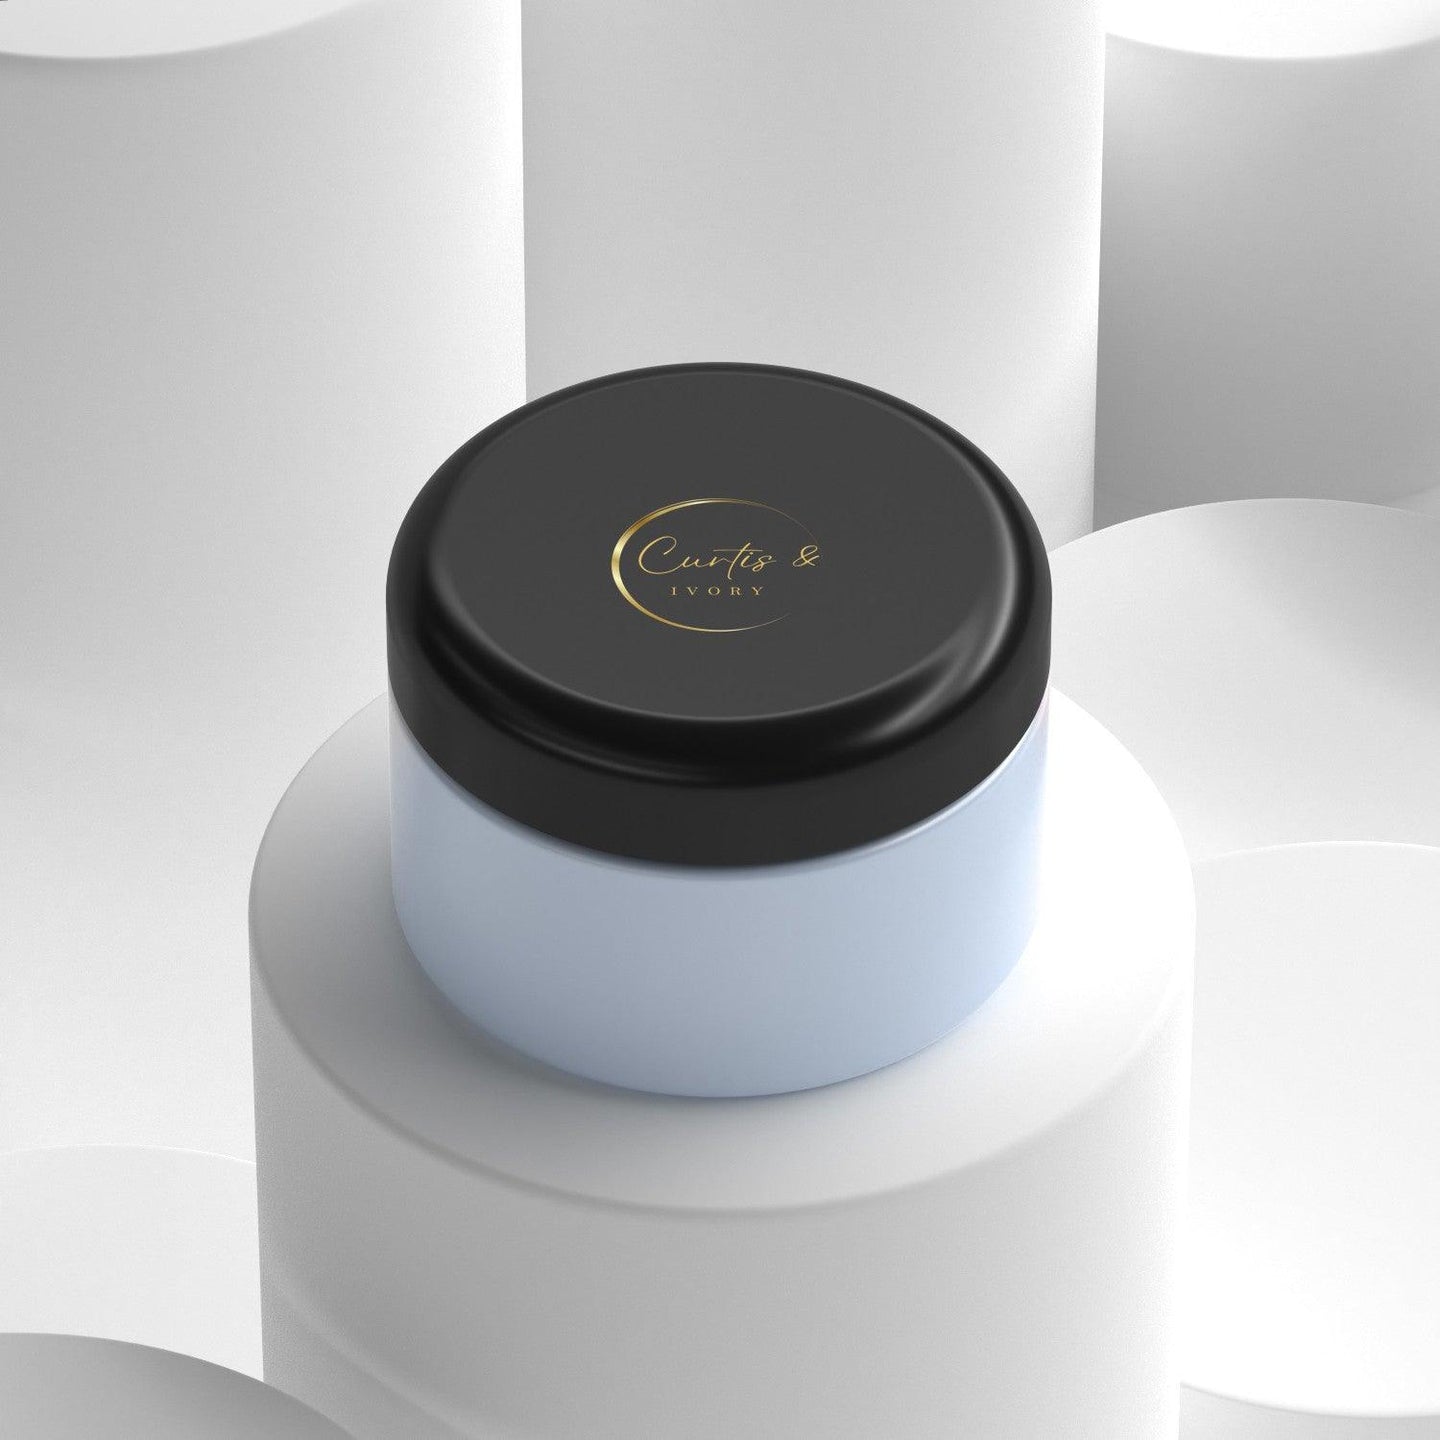 Curtis & Ivory Exfoliating Clay Mask. Reduce the oiliness of the skin - Curtis & Ivory